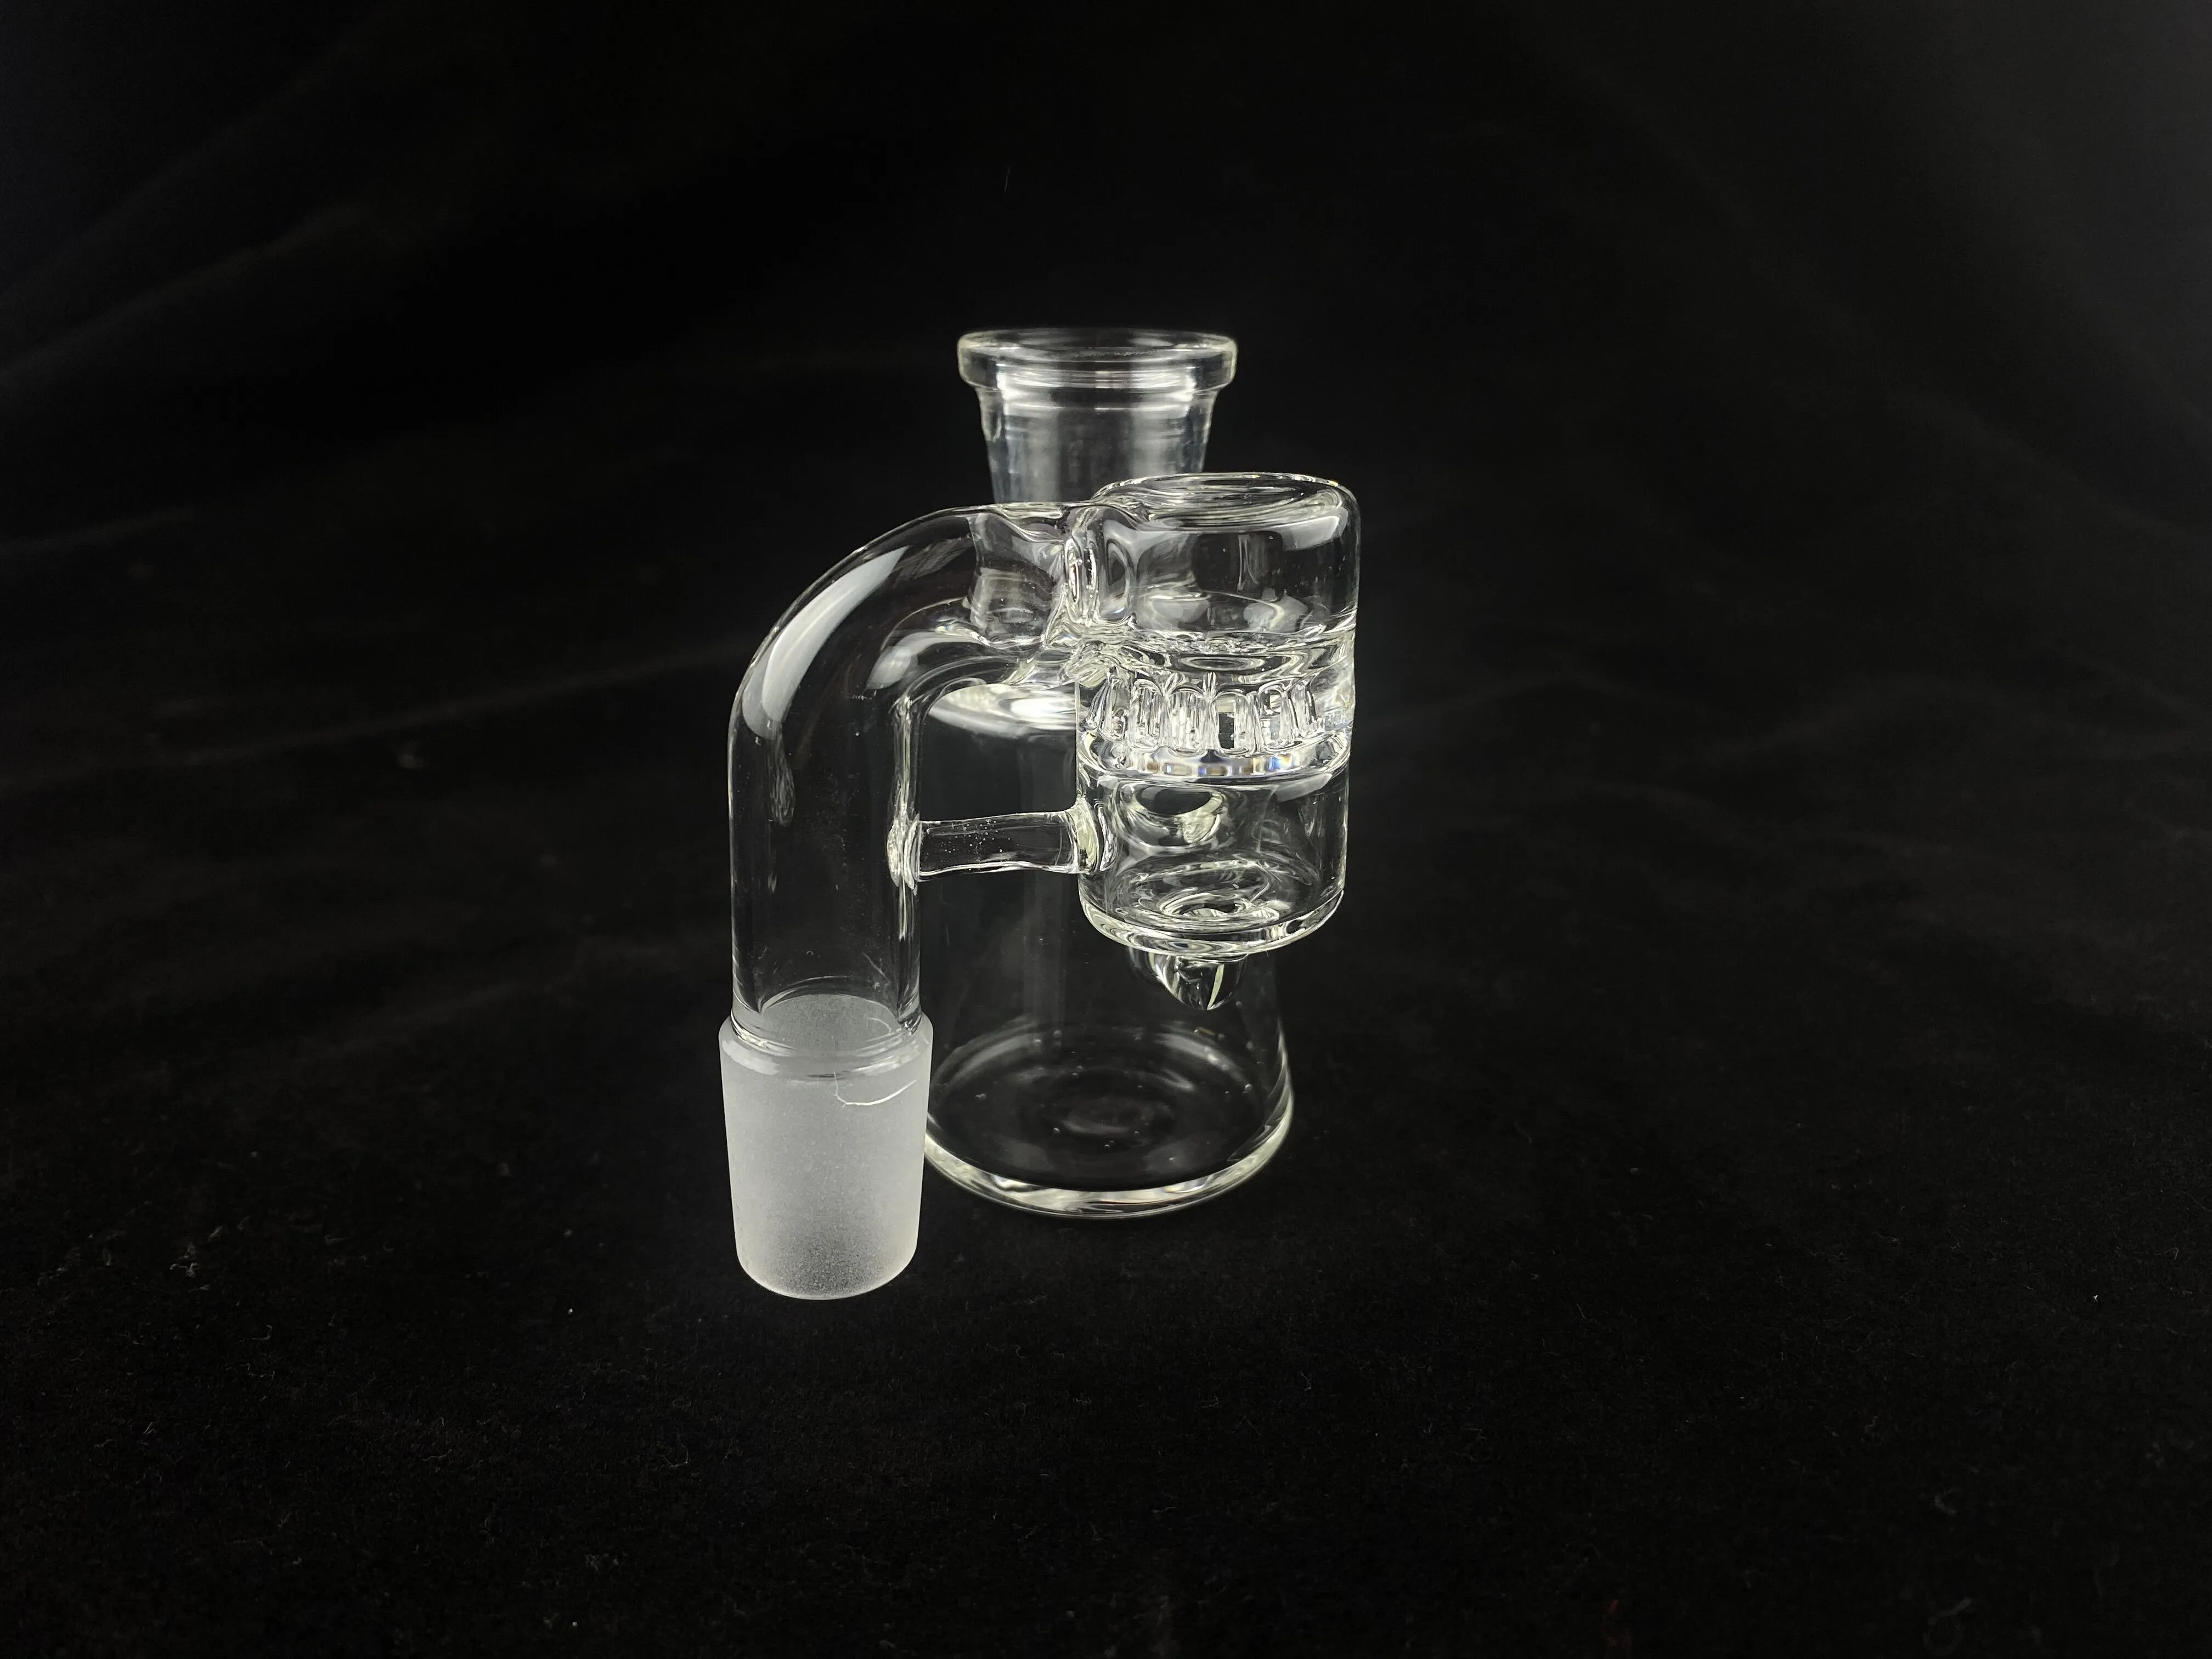 smoking pipes Biao glass dry catcher clear high quality